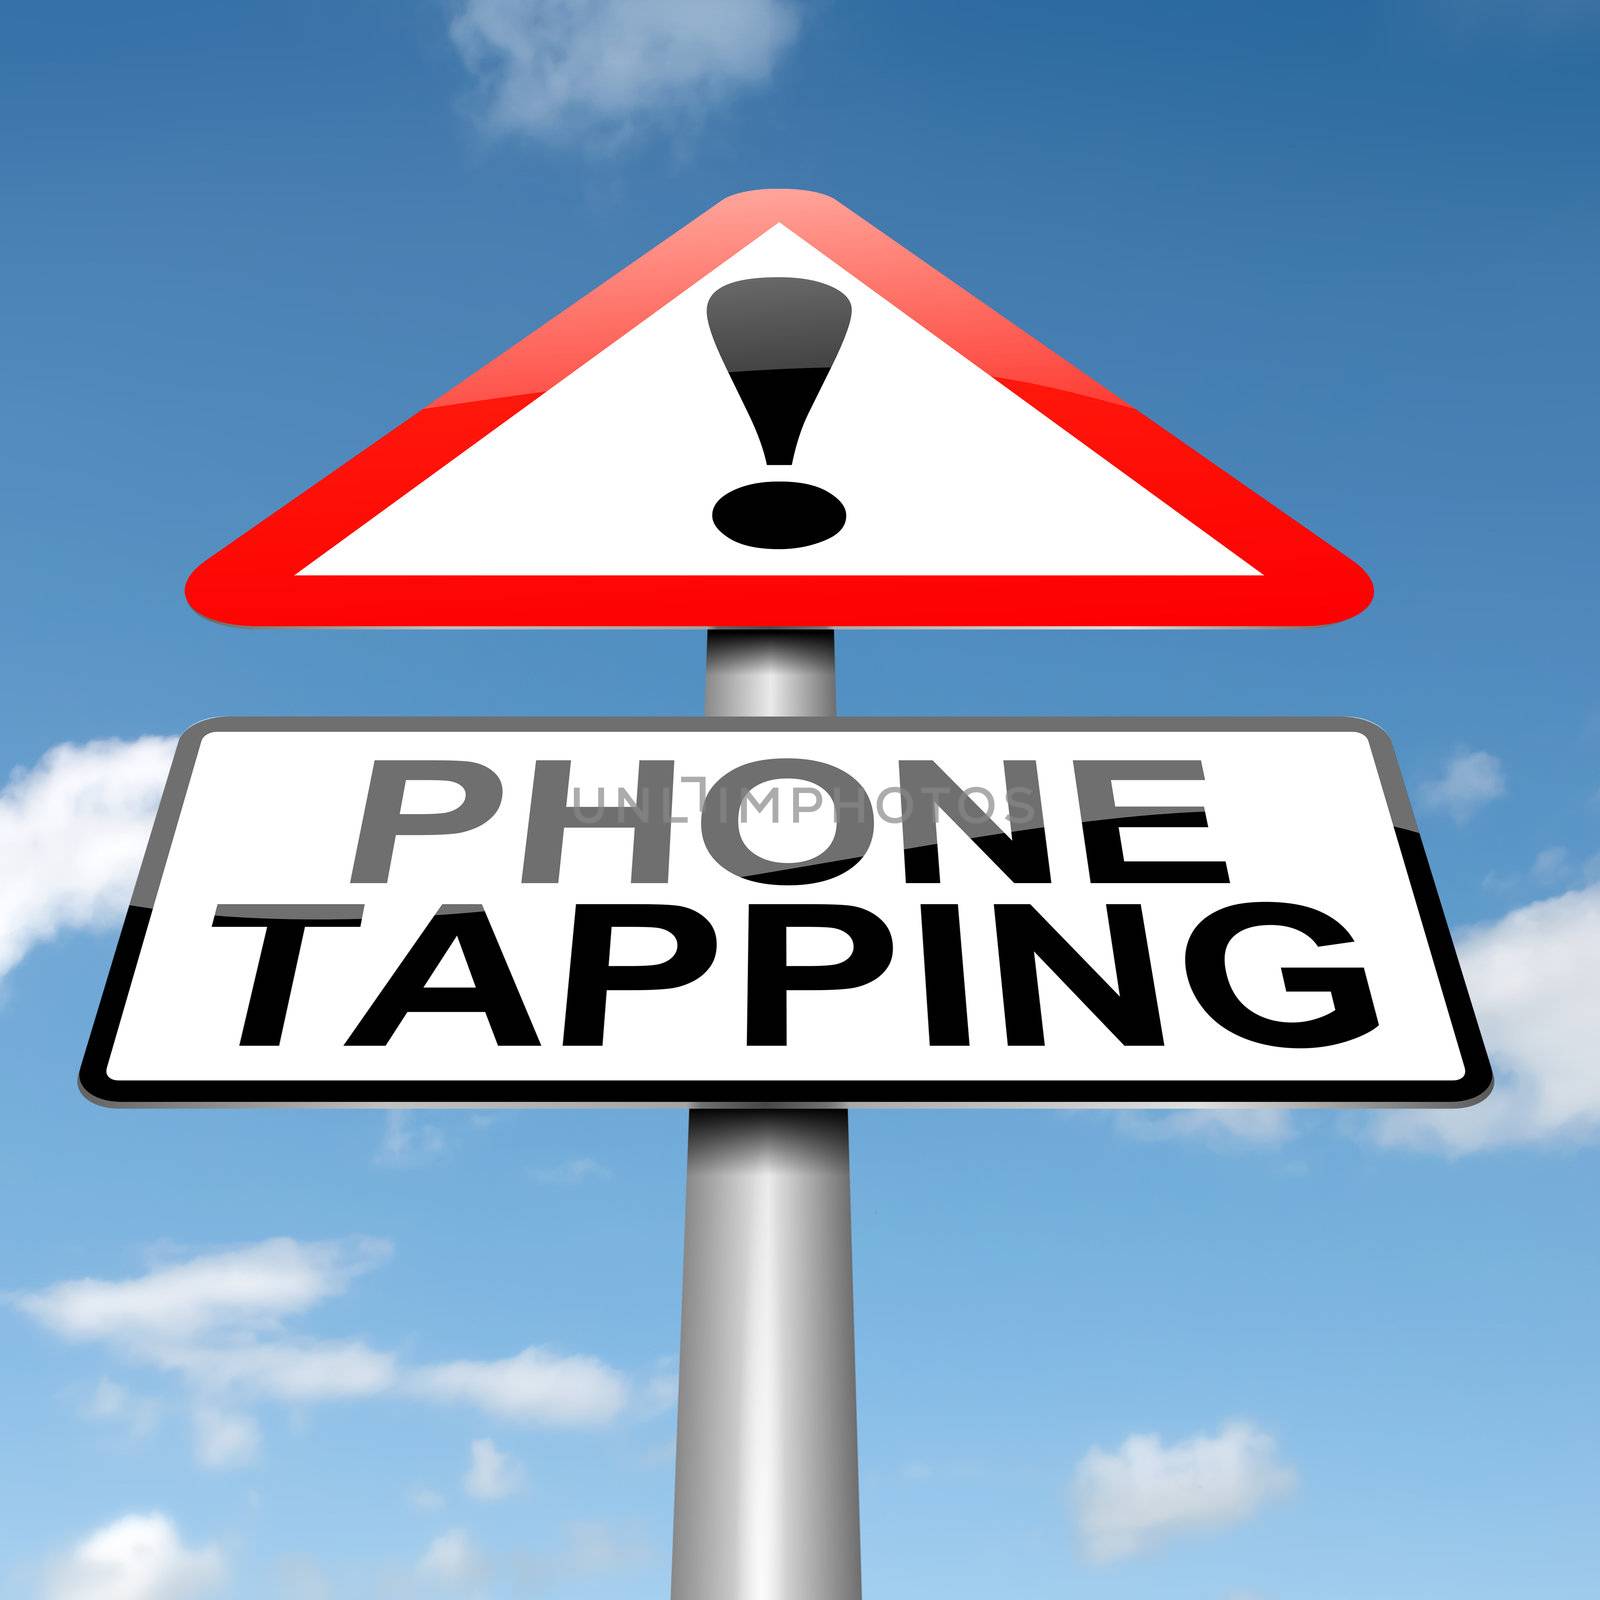 Illustration depicting a sign with a phone tapping concept.